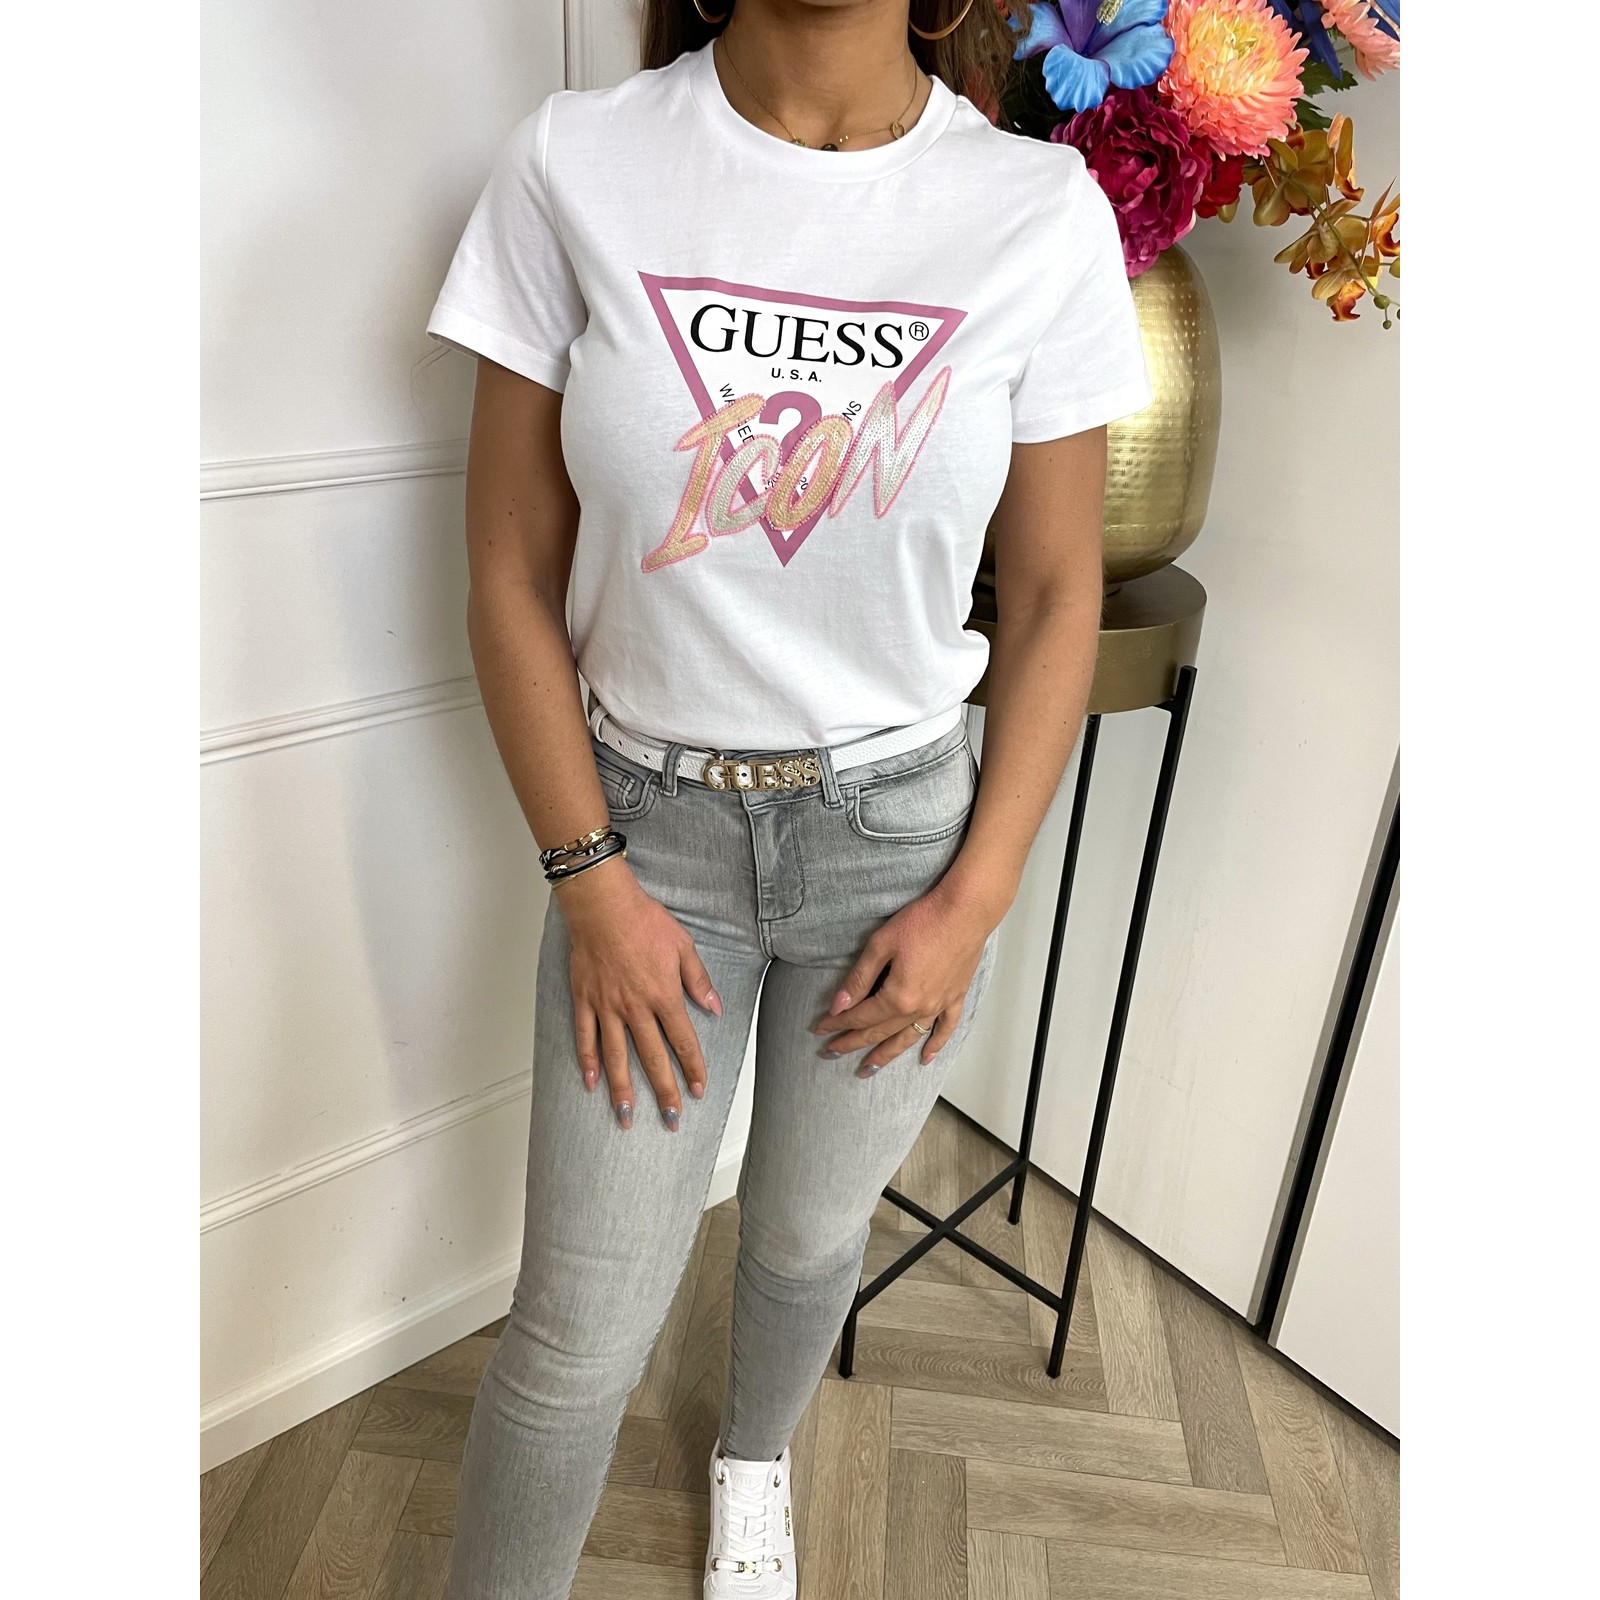 Guess T-Shirt Icon White Guess 129